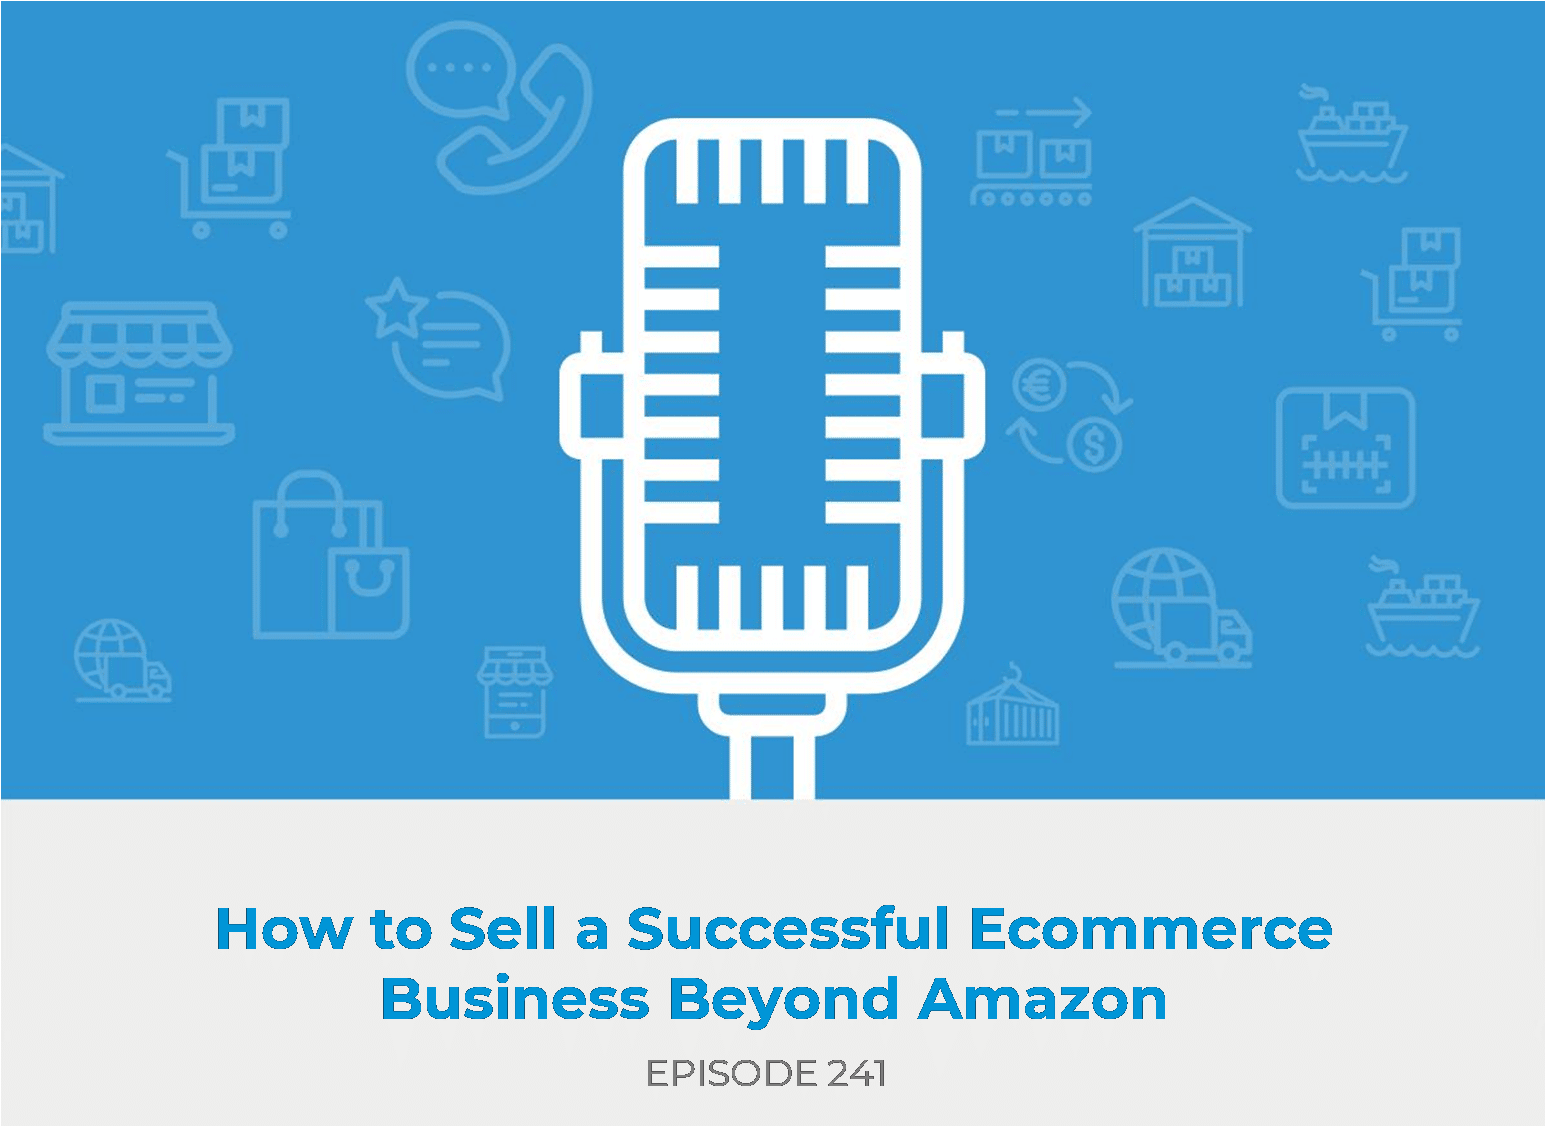 How to Build a Successful Ecommerce Business Beyond Amazon